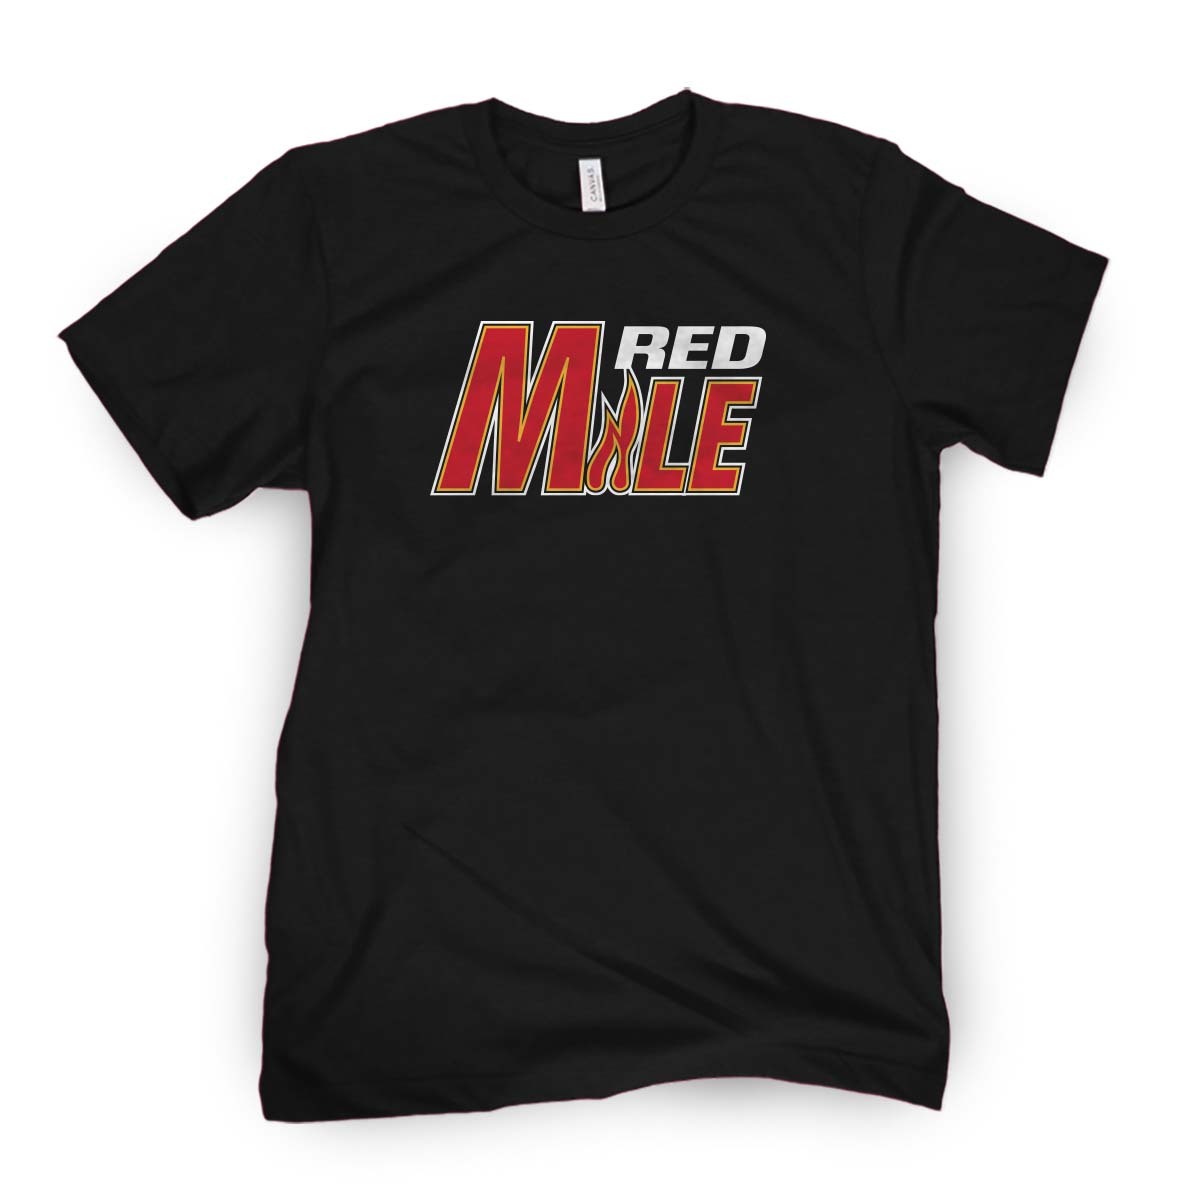 Red Mile Tee